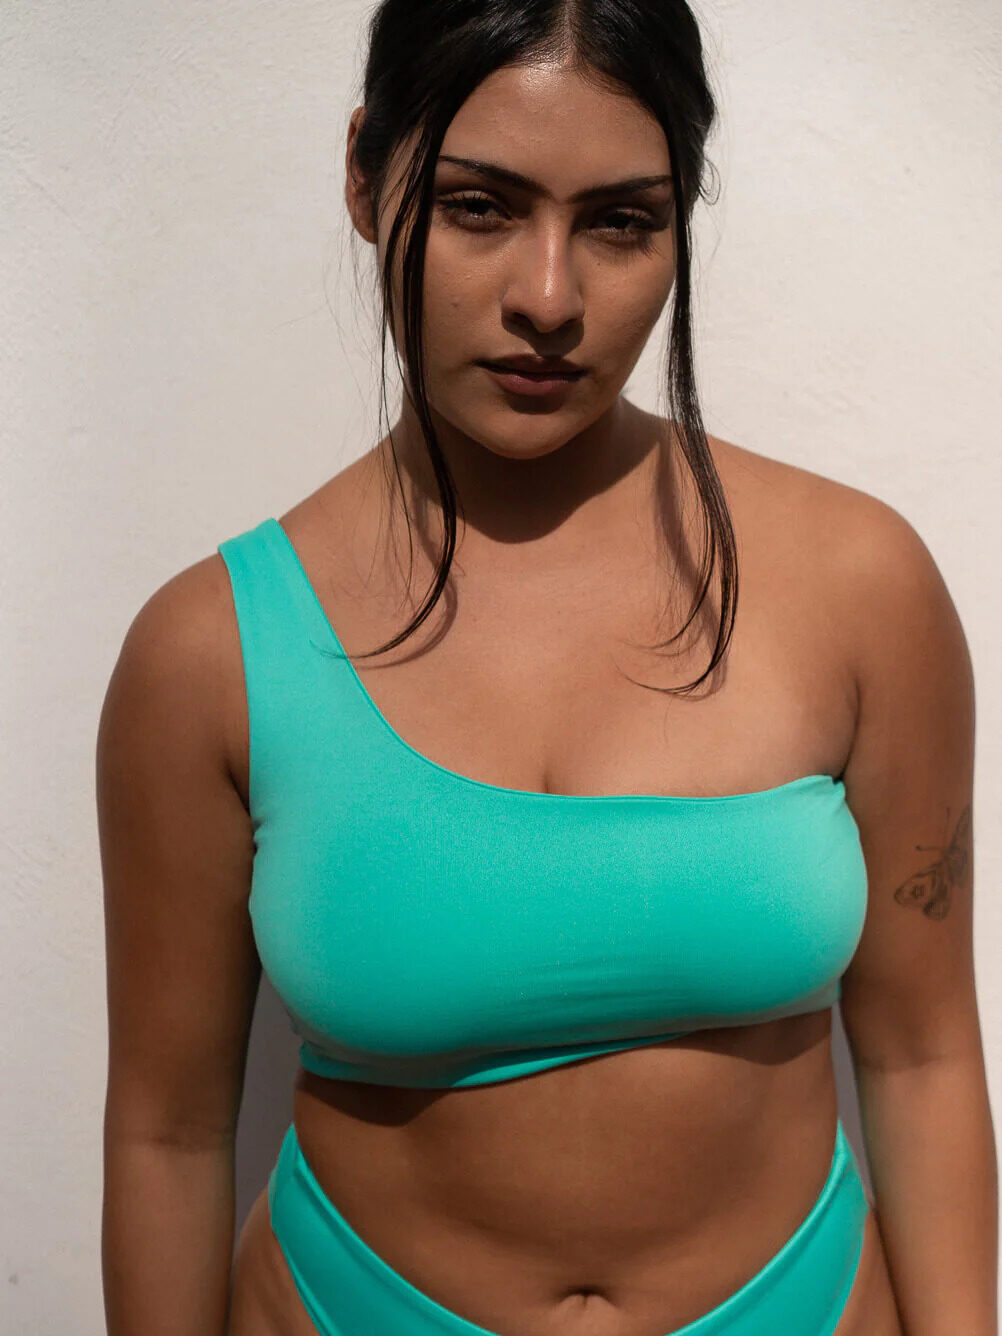 Woman in turquoise sportswear standing against a white wall.